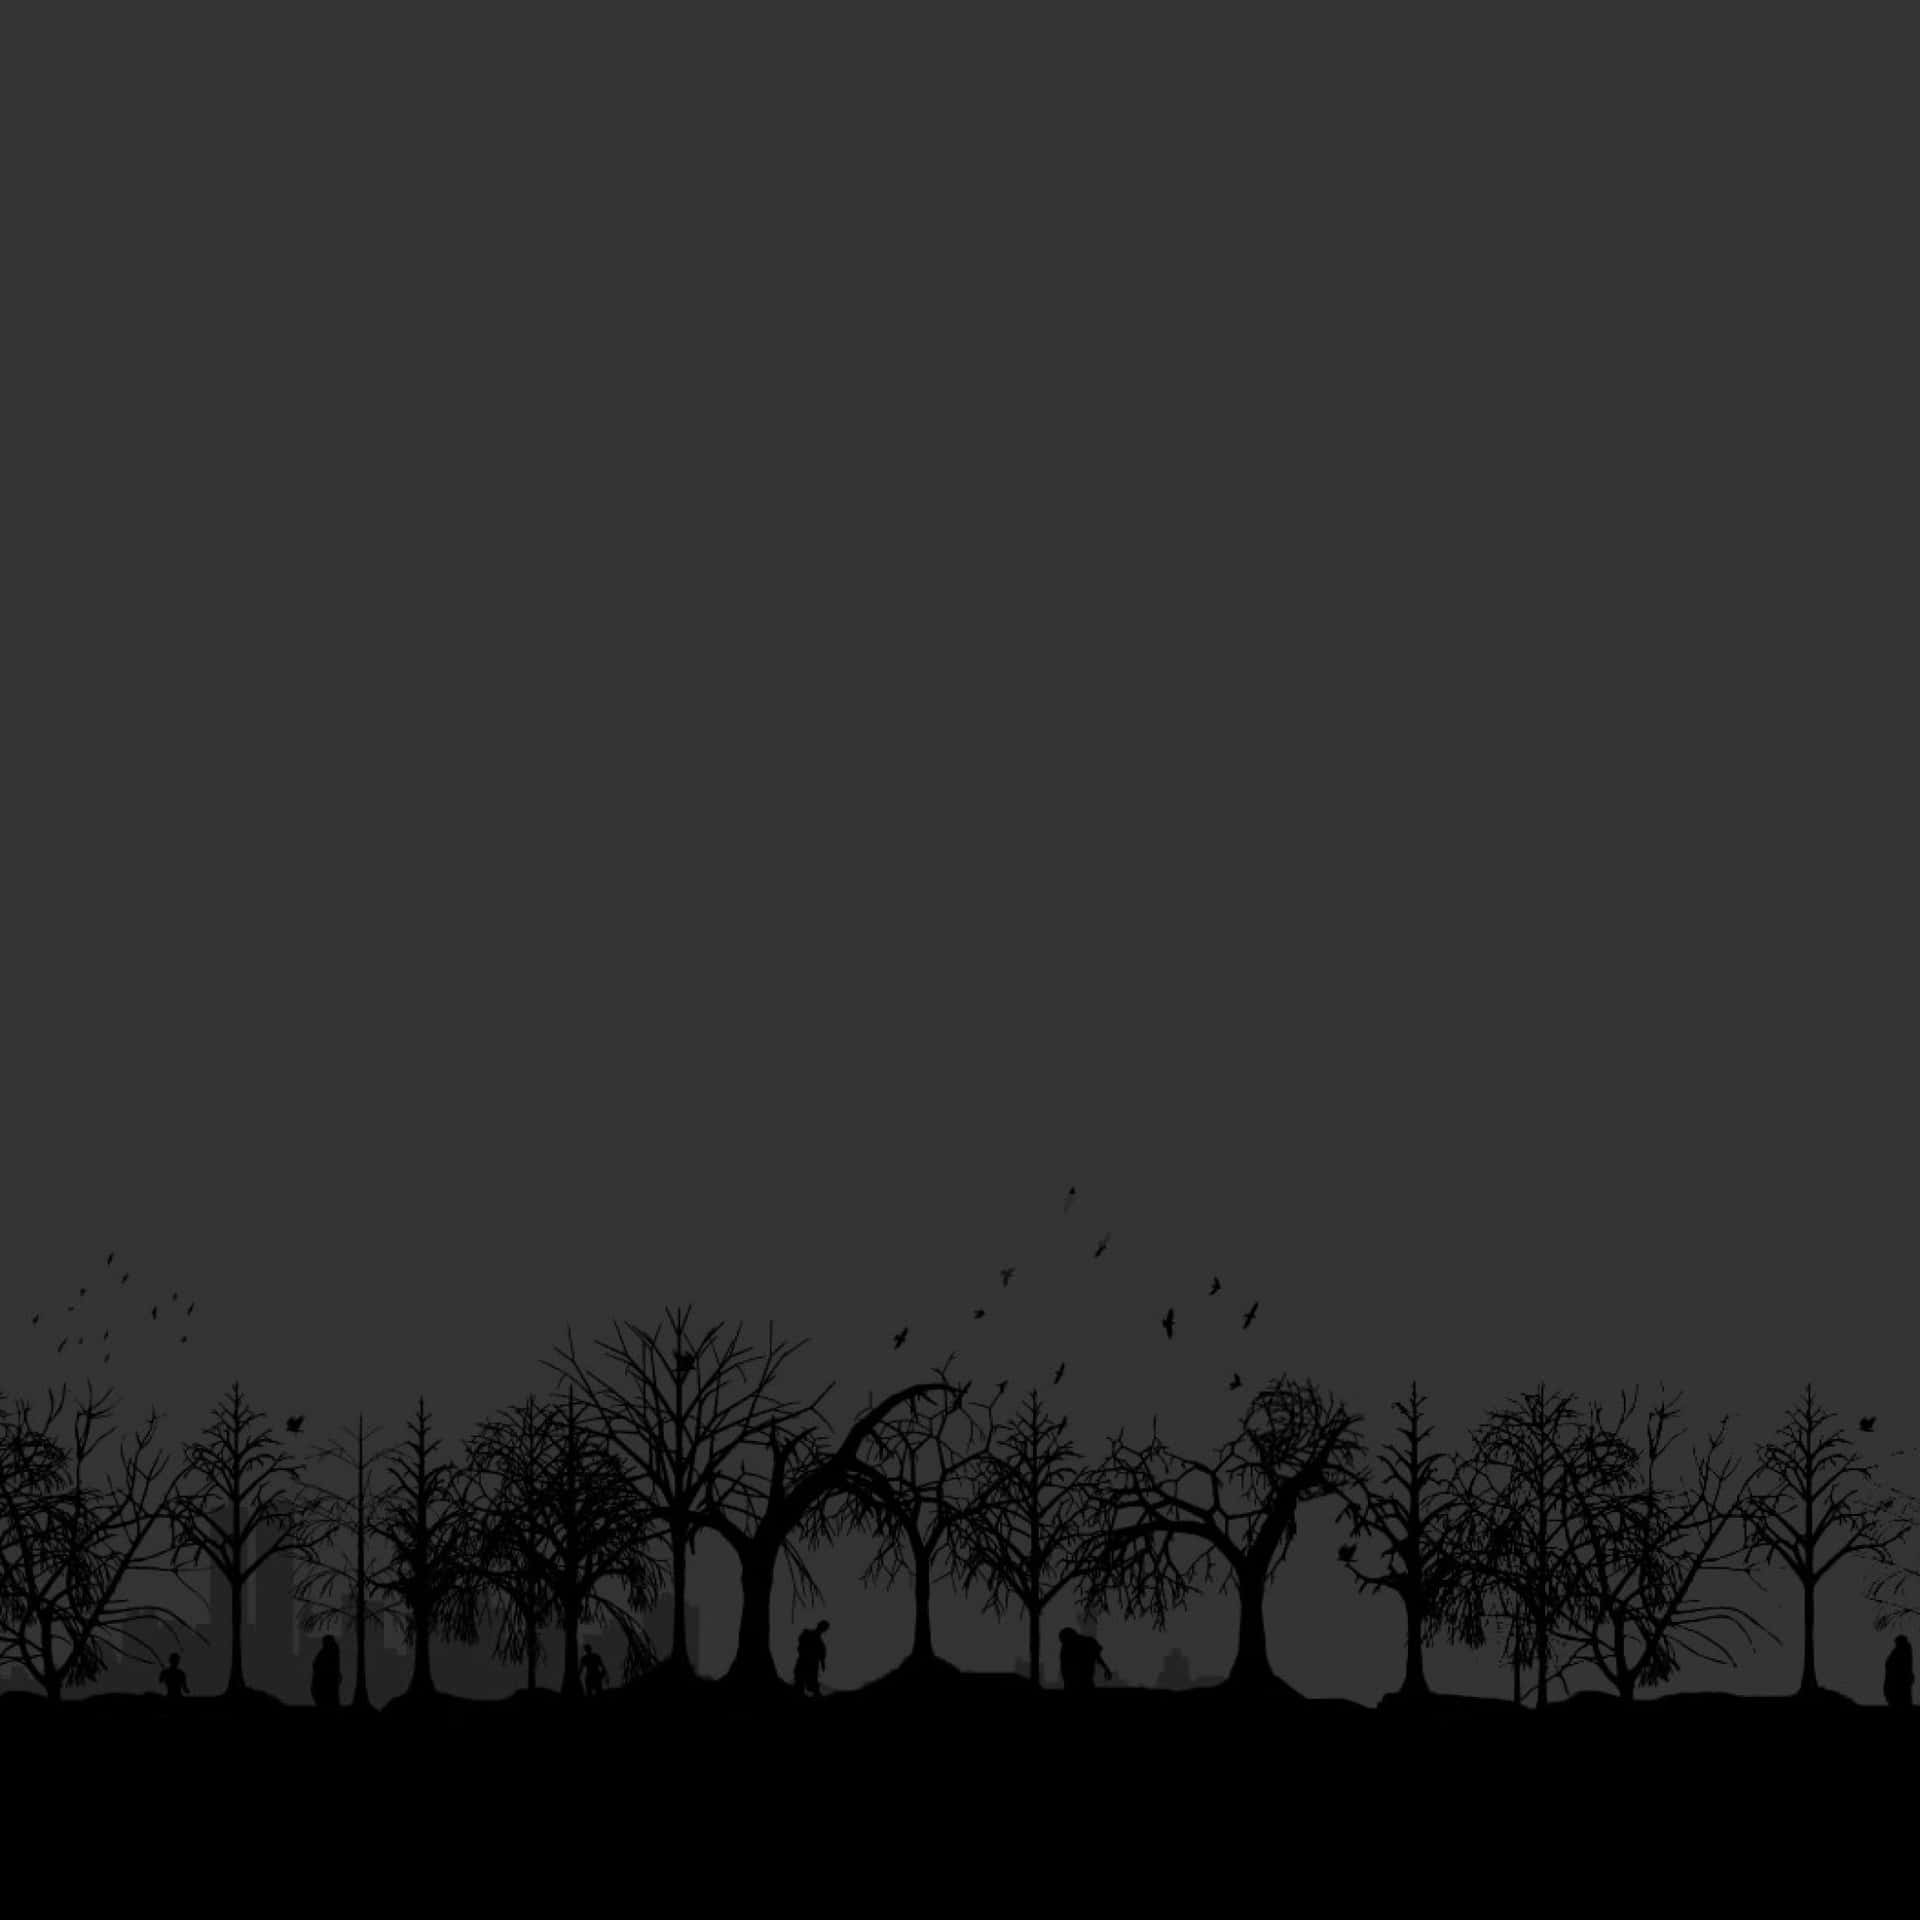 Forest Trees Silhouettes Dark Ipad Background